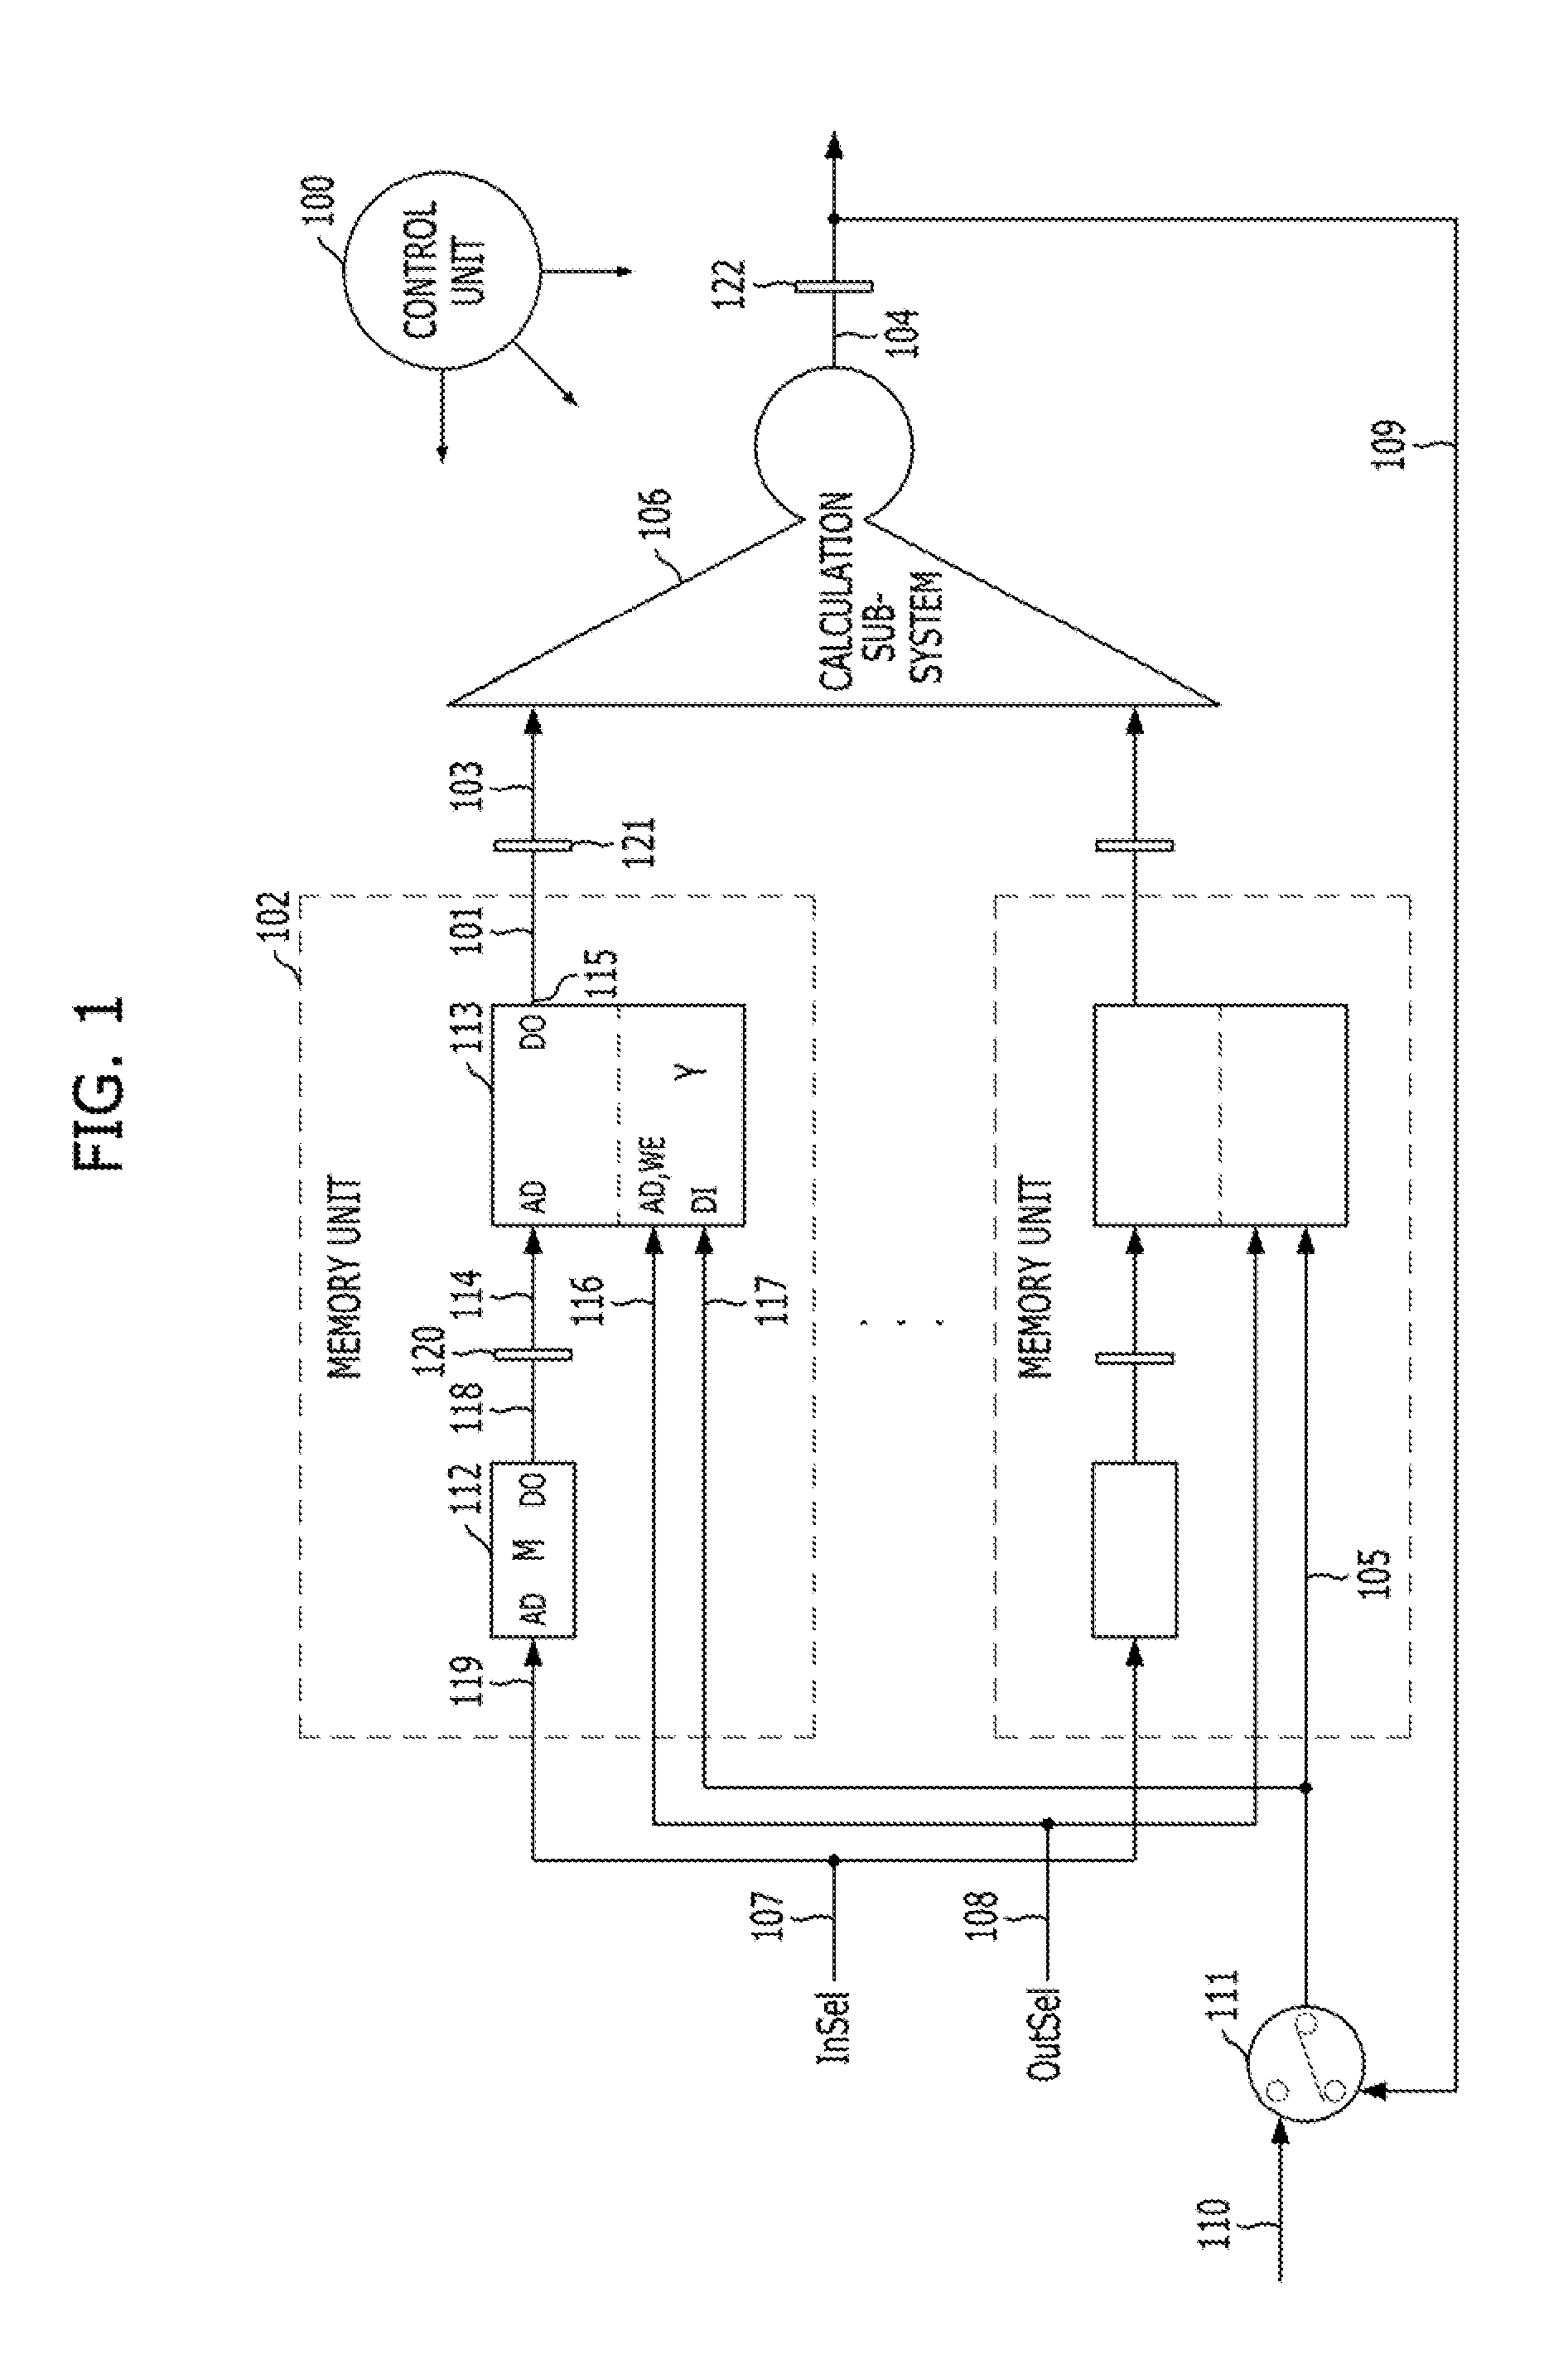 Neural network computing device, system and method